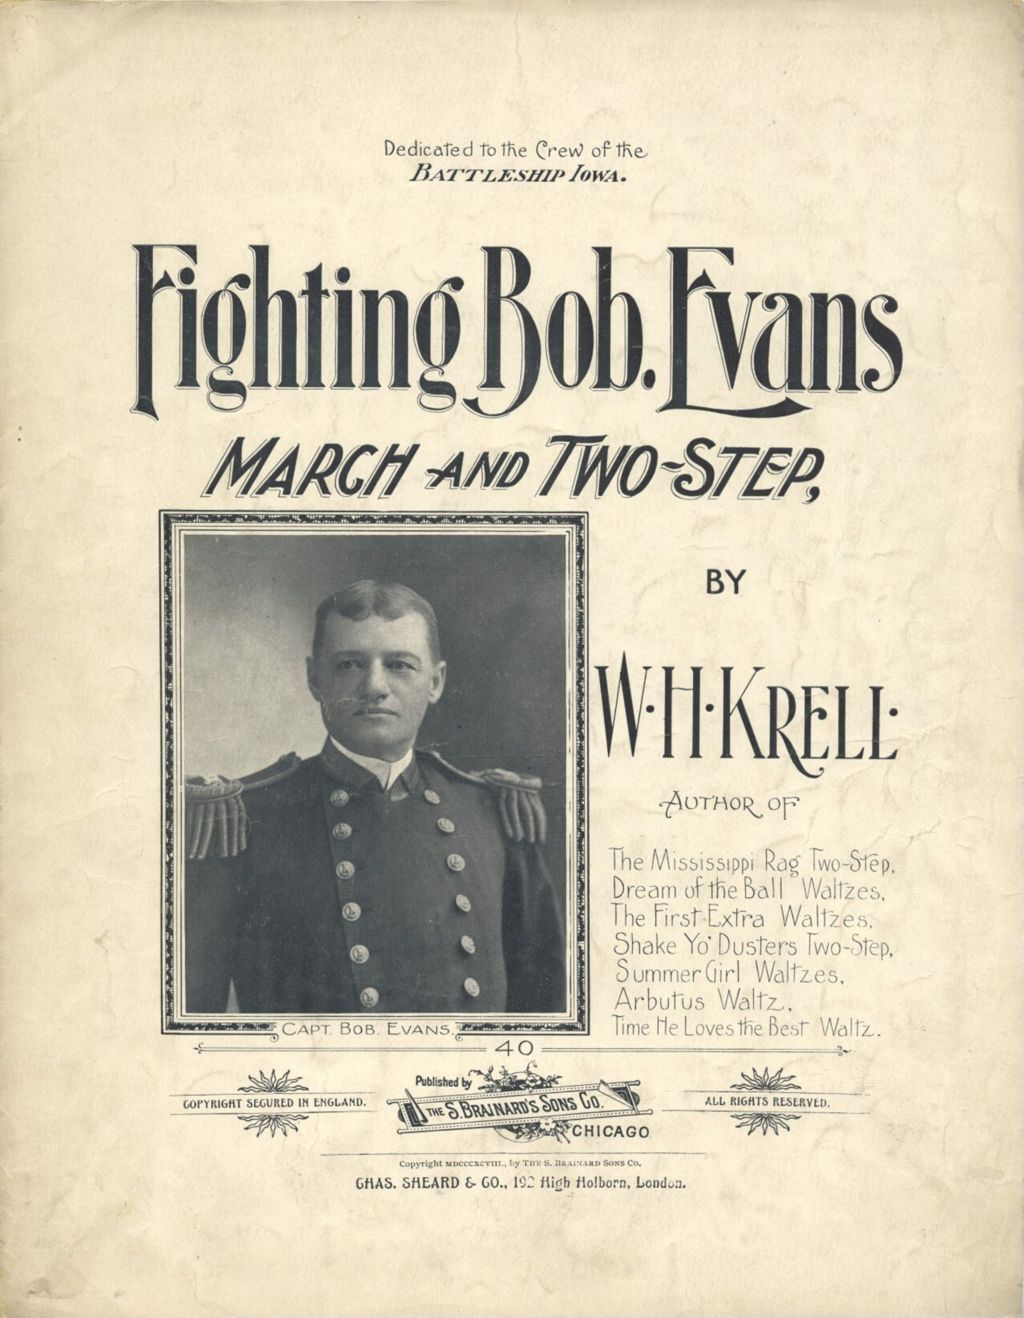 Fighting Bob Evans (March and Two-Step)